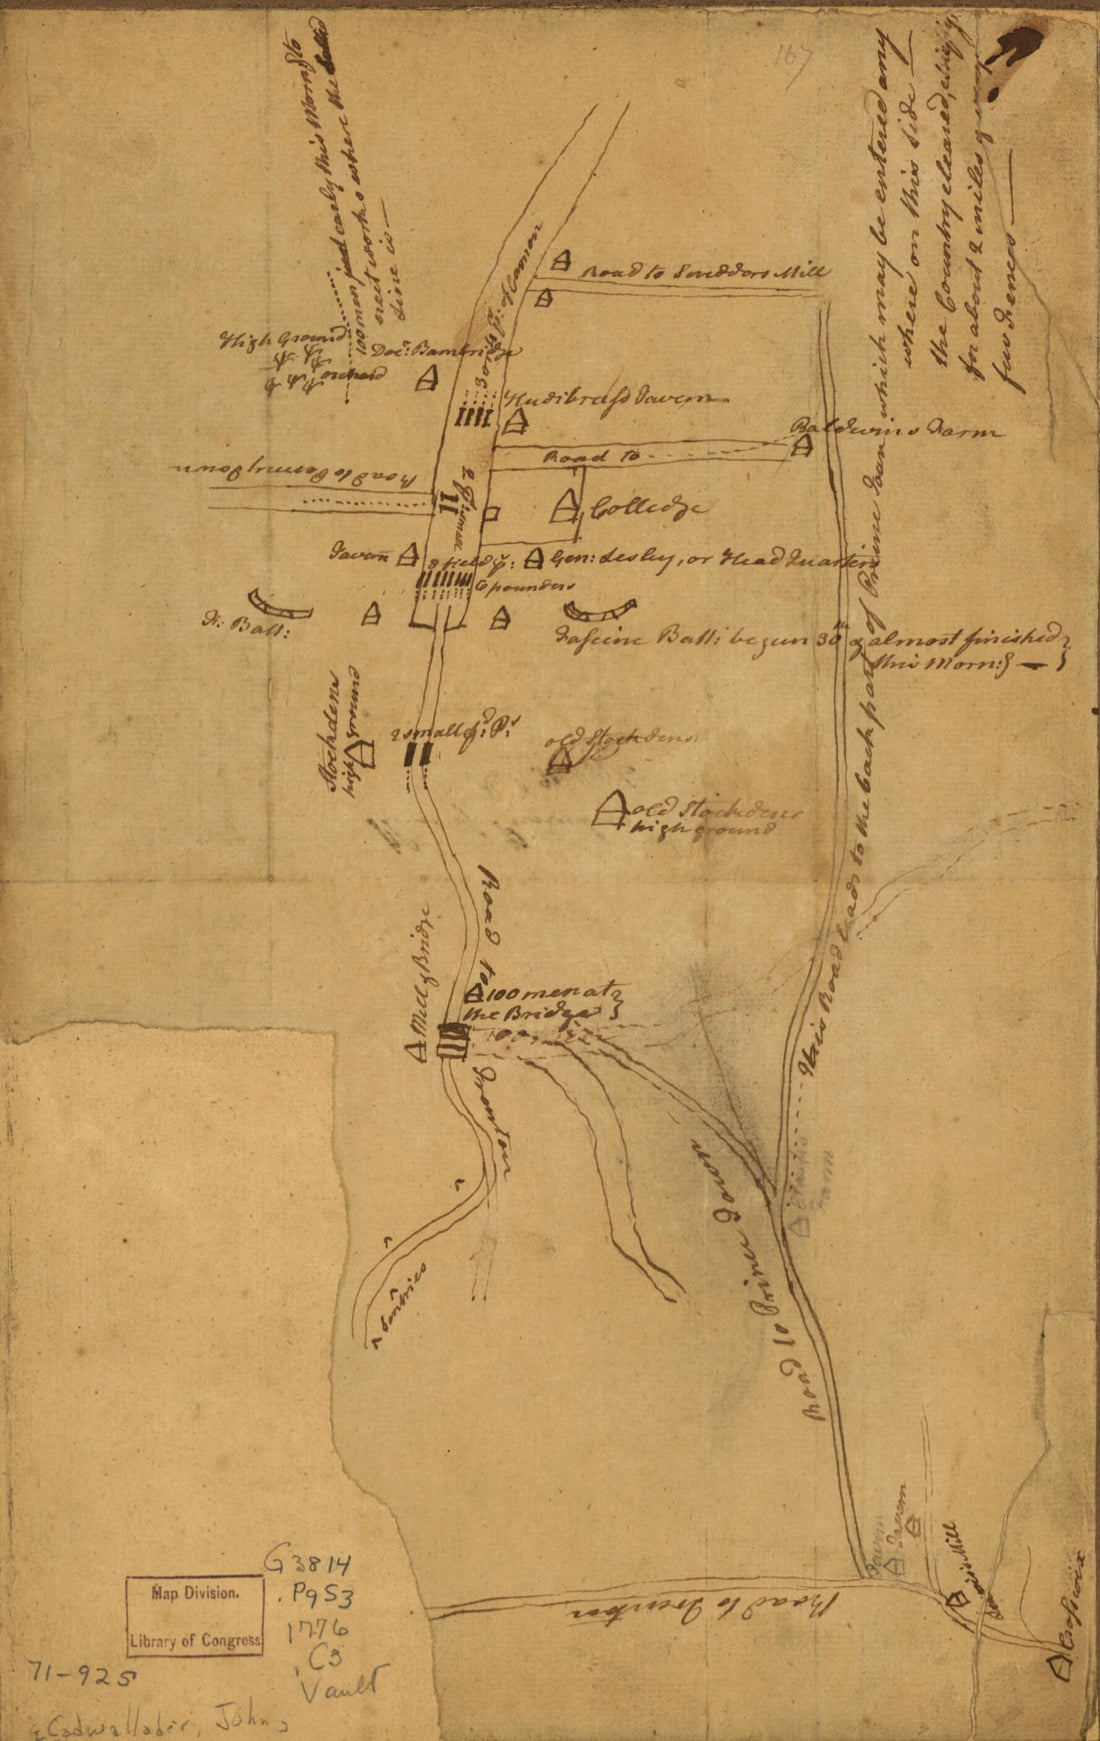 This old map of Plan of Princeton, Dec. 31, from 1776 was created by John] [Cadwalader in 1776